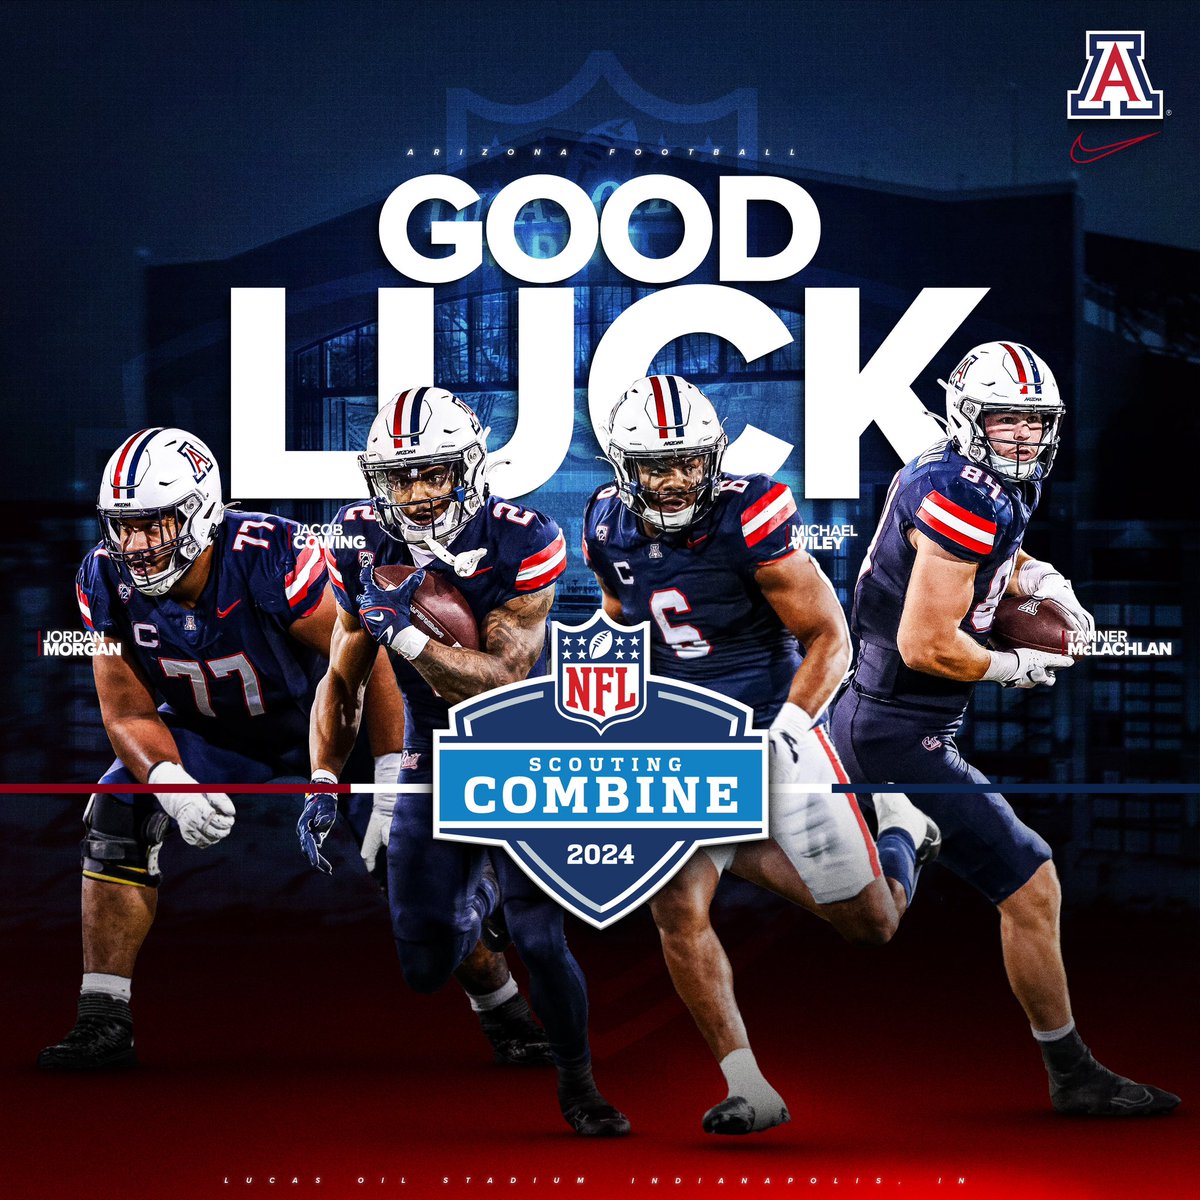 Good luck to our guys in Indianapolis🐻⬇️